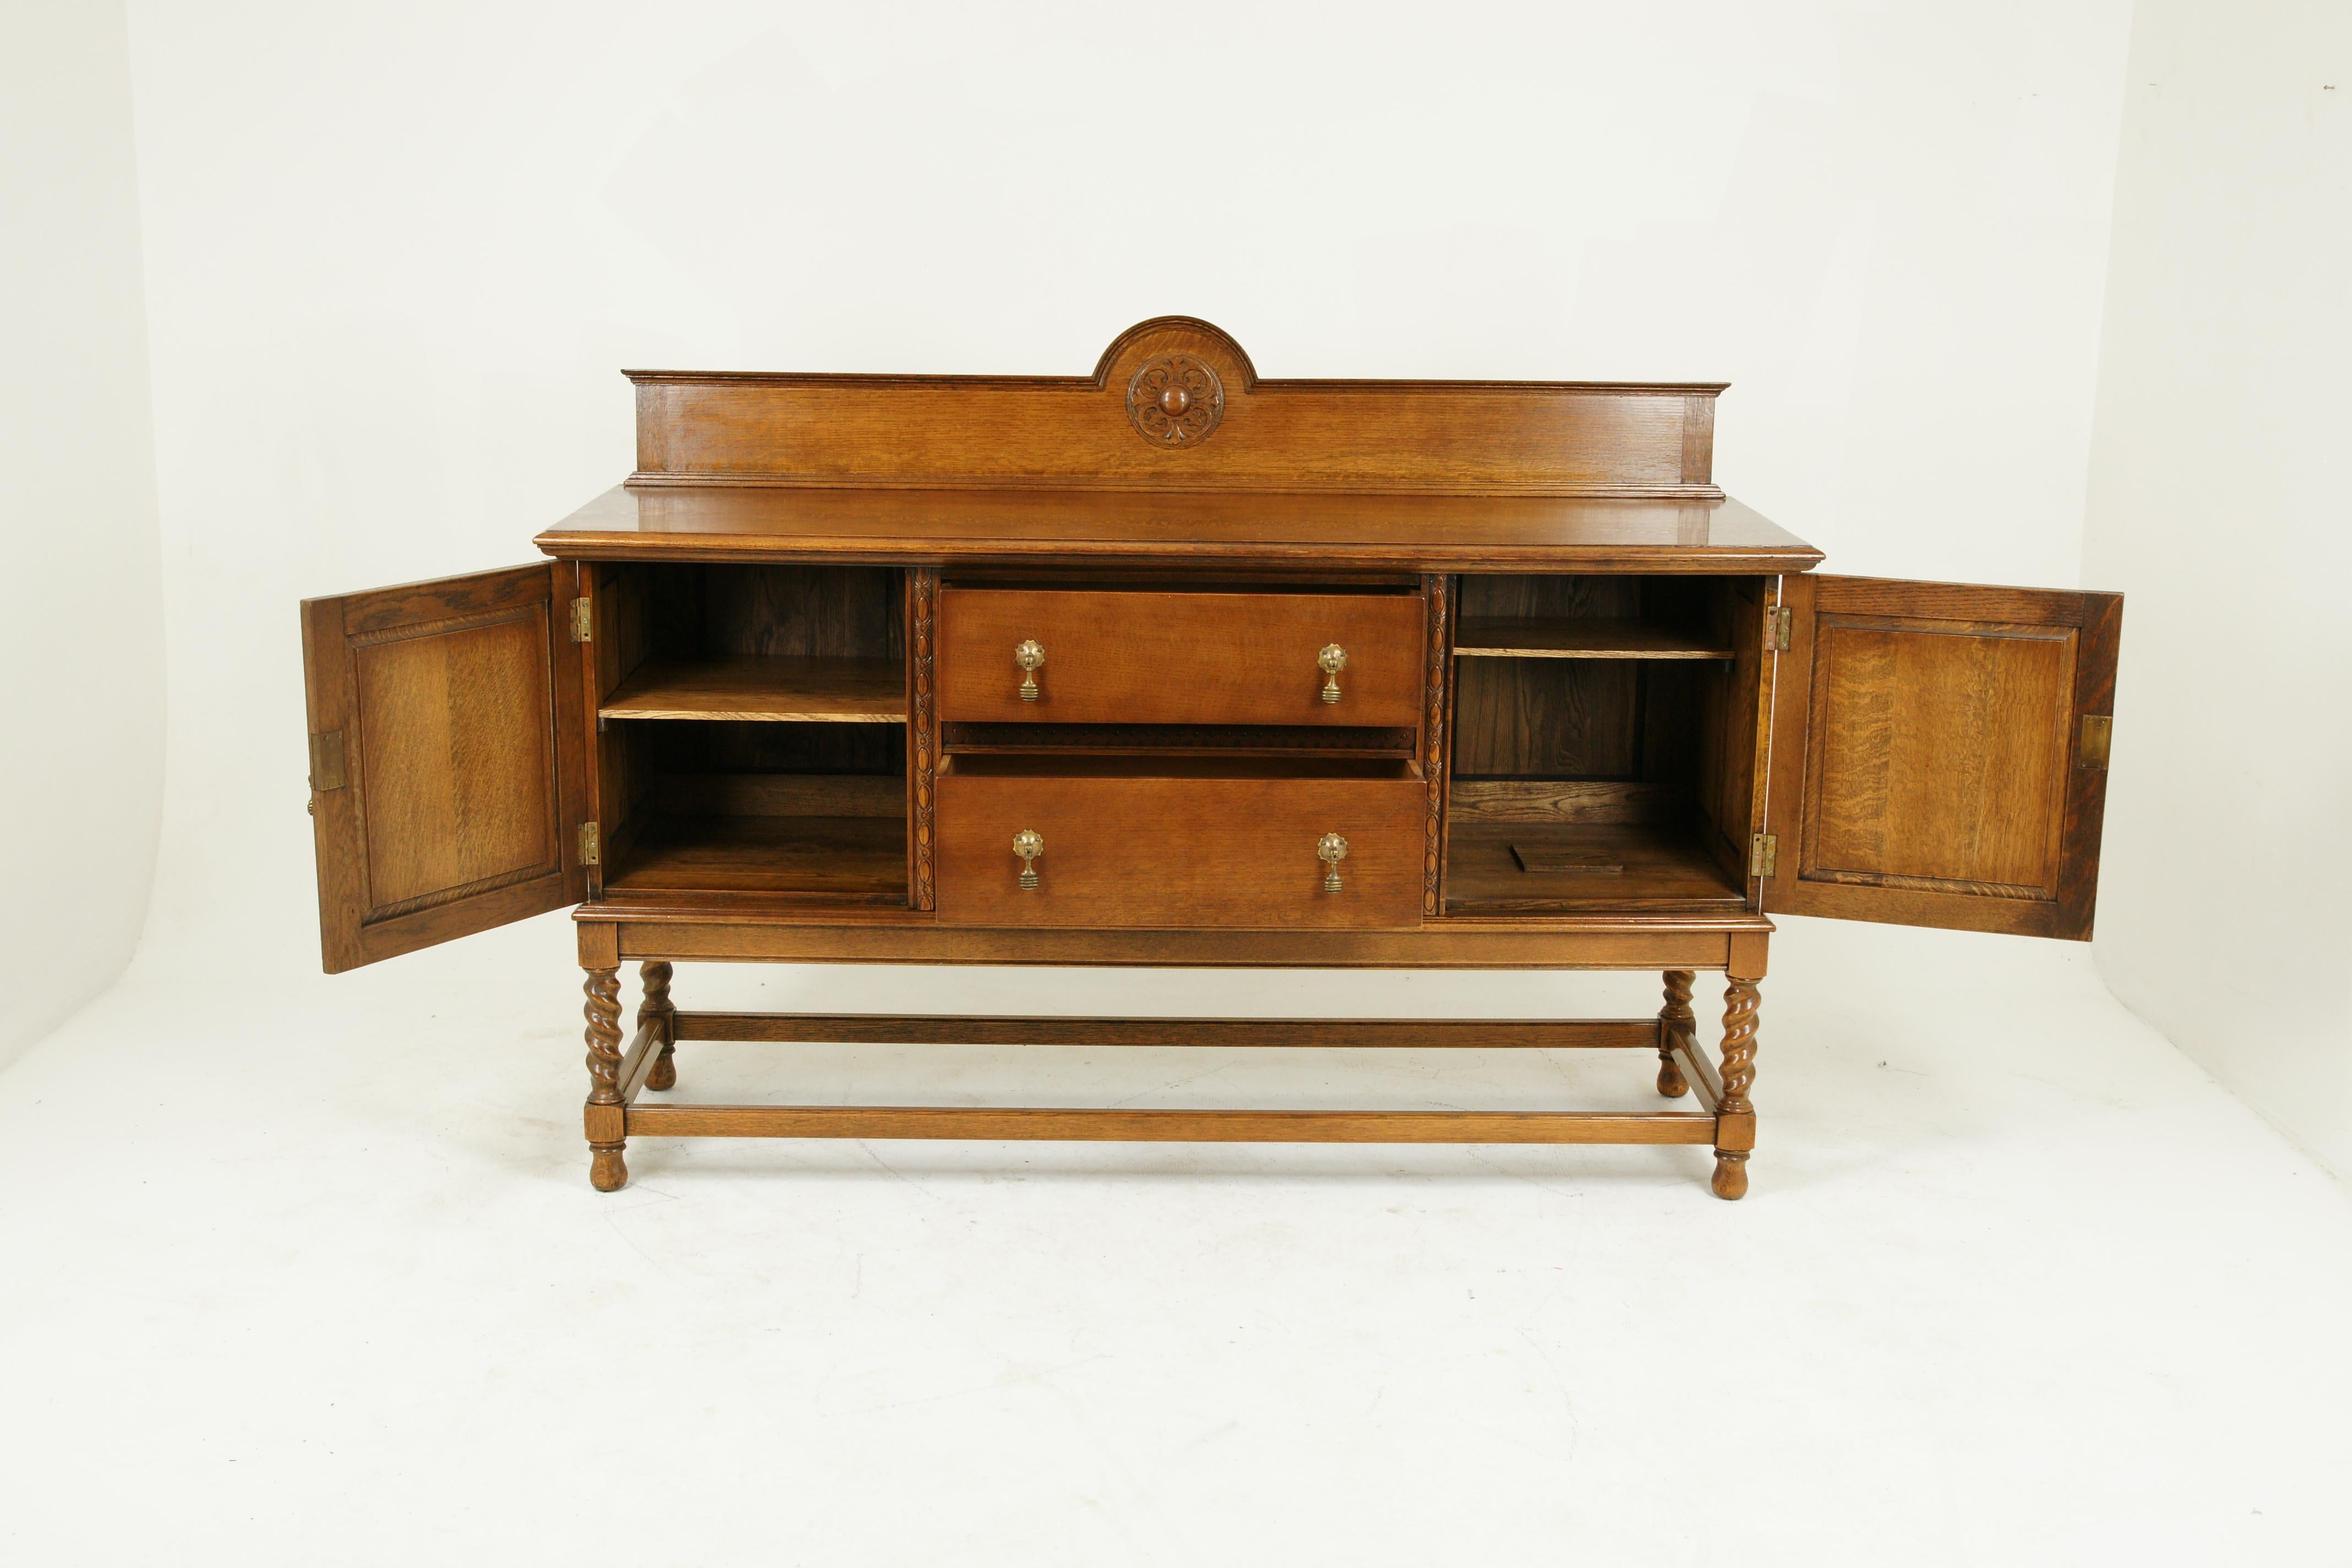 Antique sideboard, antique buffet, carved oak credenza, Scotland 1920, Antique Furniture, B1532

Scotland 1920
Solid oak construction
Golden oak finish
Upstand back with central rectangular molded top
Pair of large deep drawers with original